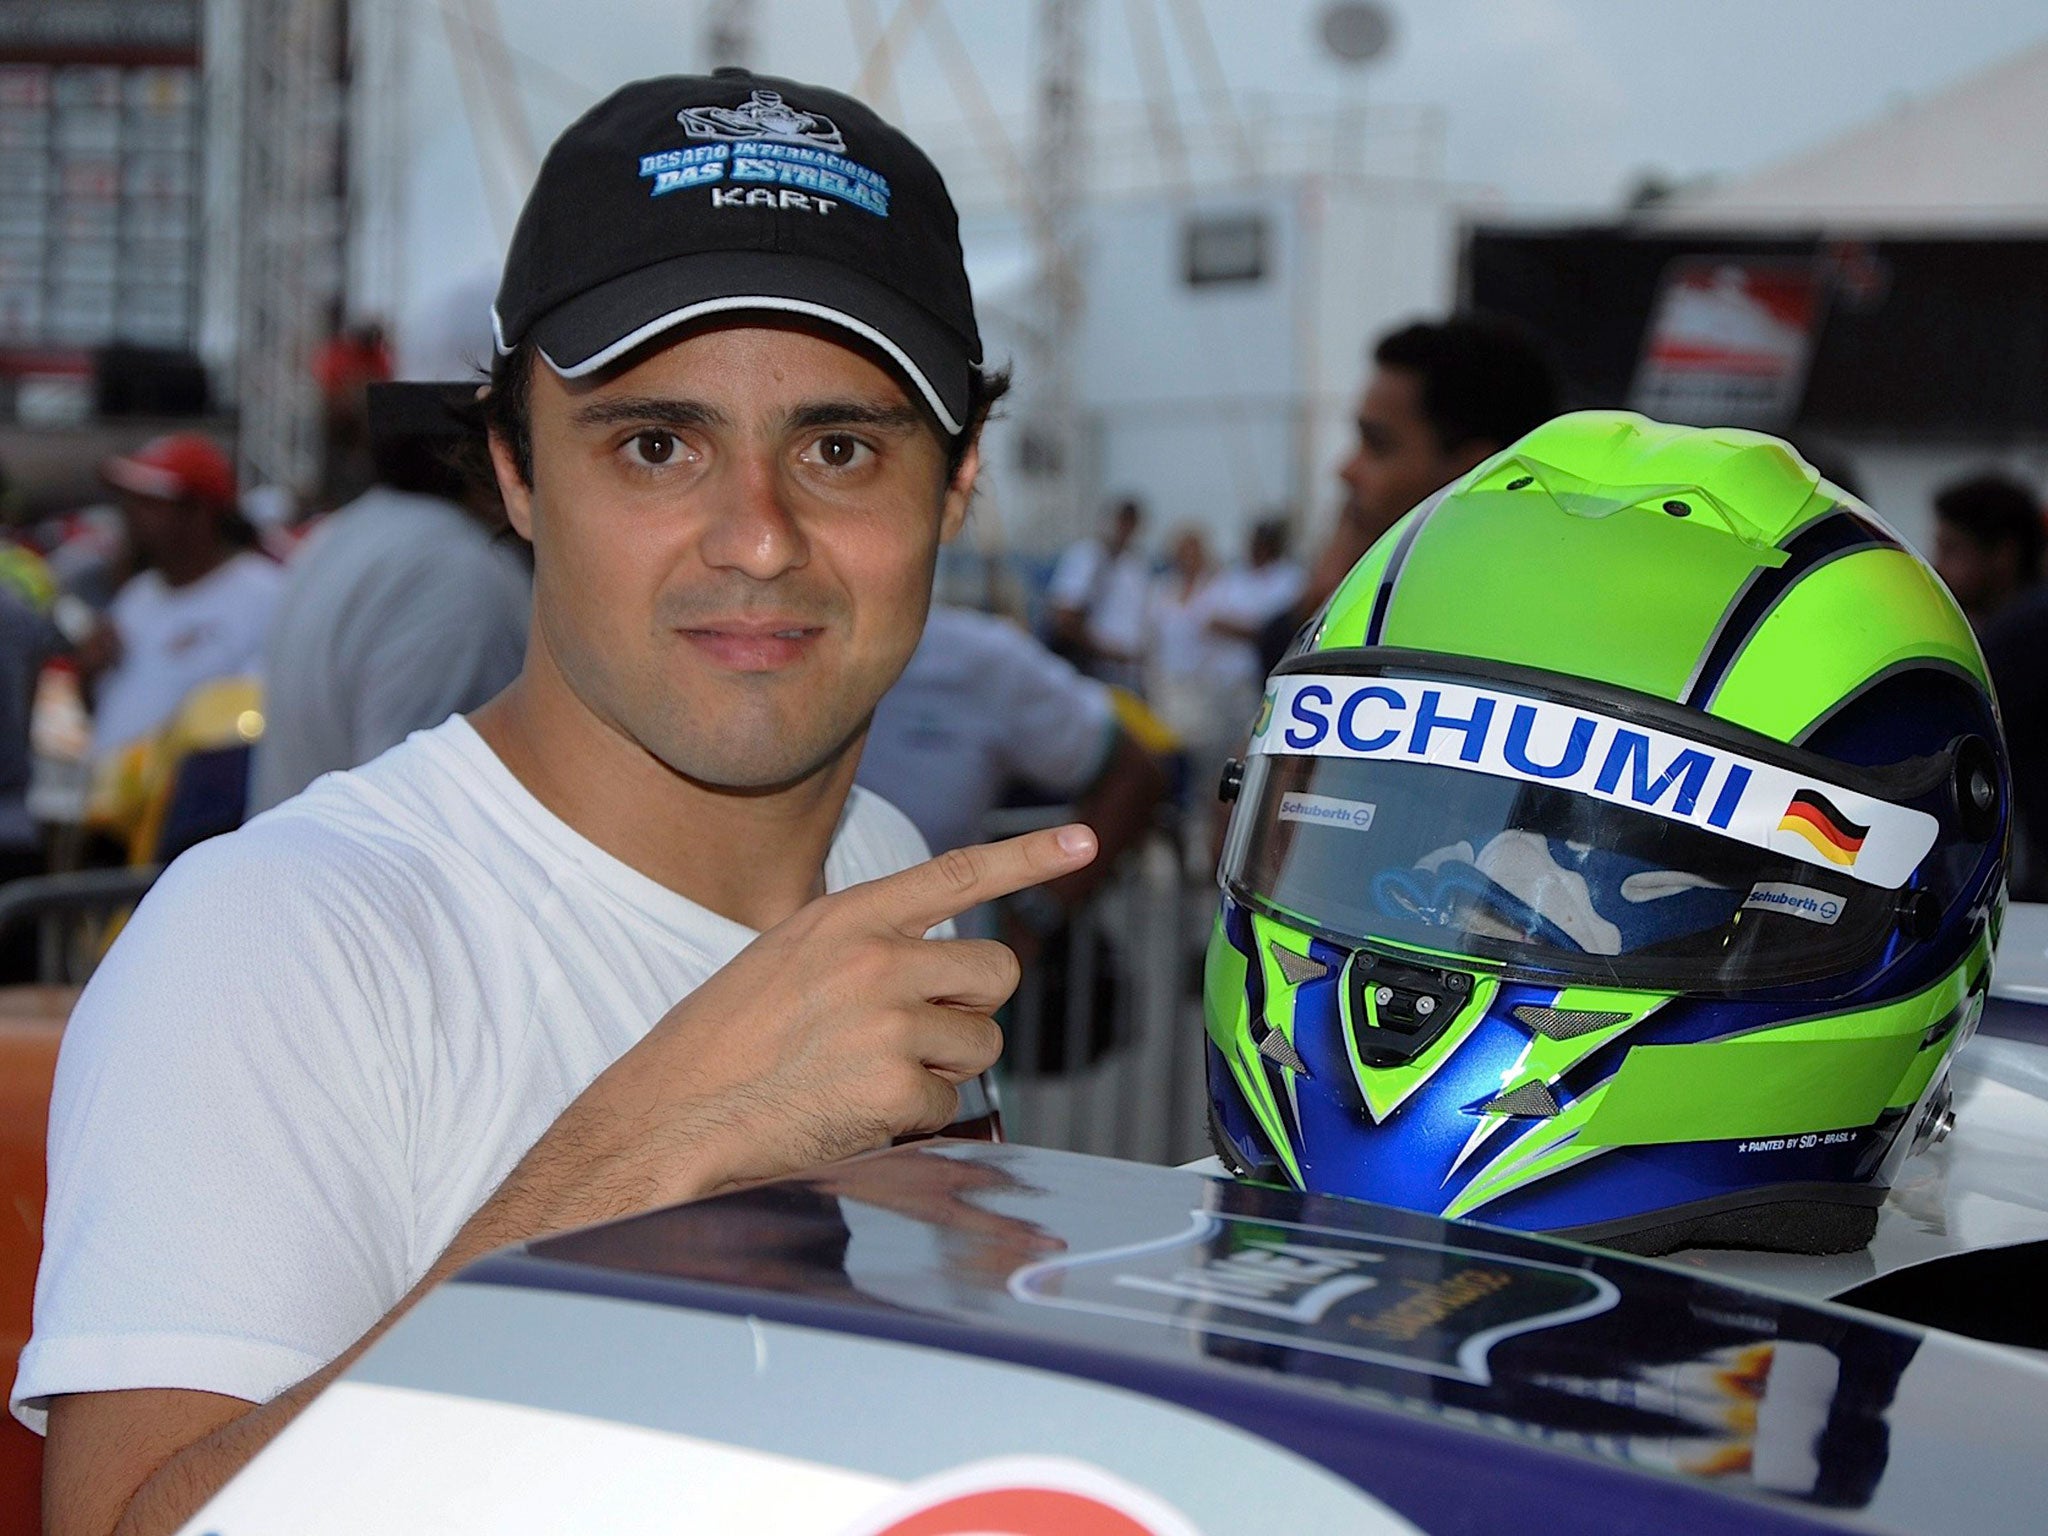 Felipe Massa paid tribute to his former team-mate Michael Schumacher during his annual charity karting race in Brazil by wearing 'Schumi' across his visor